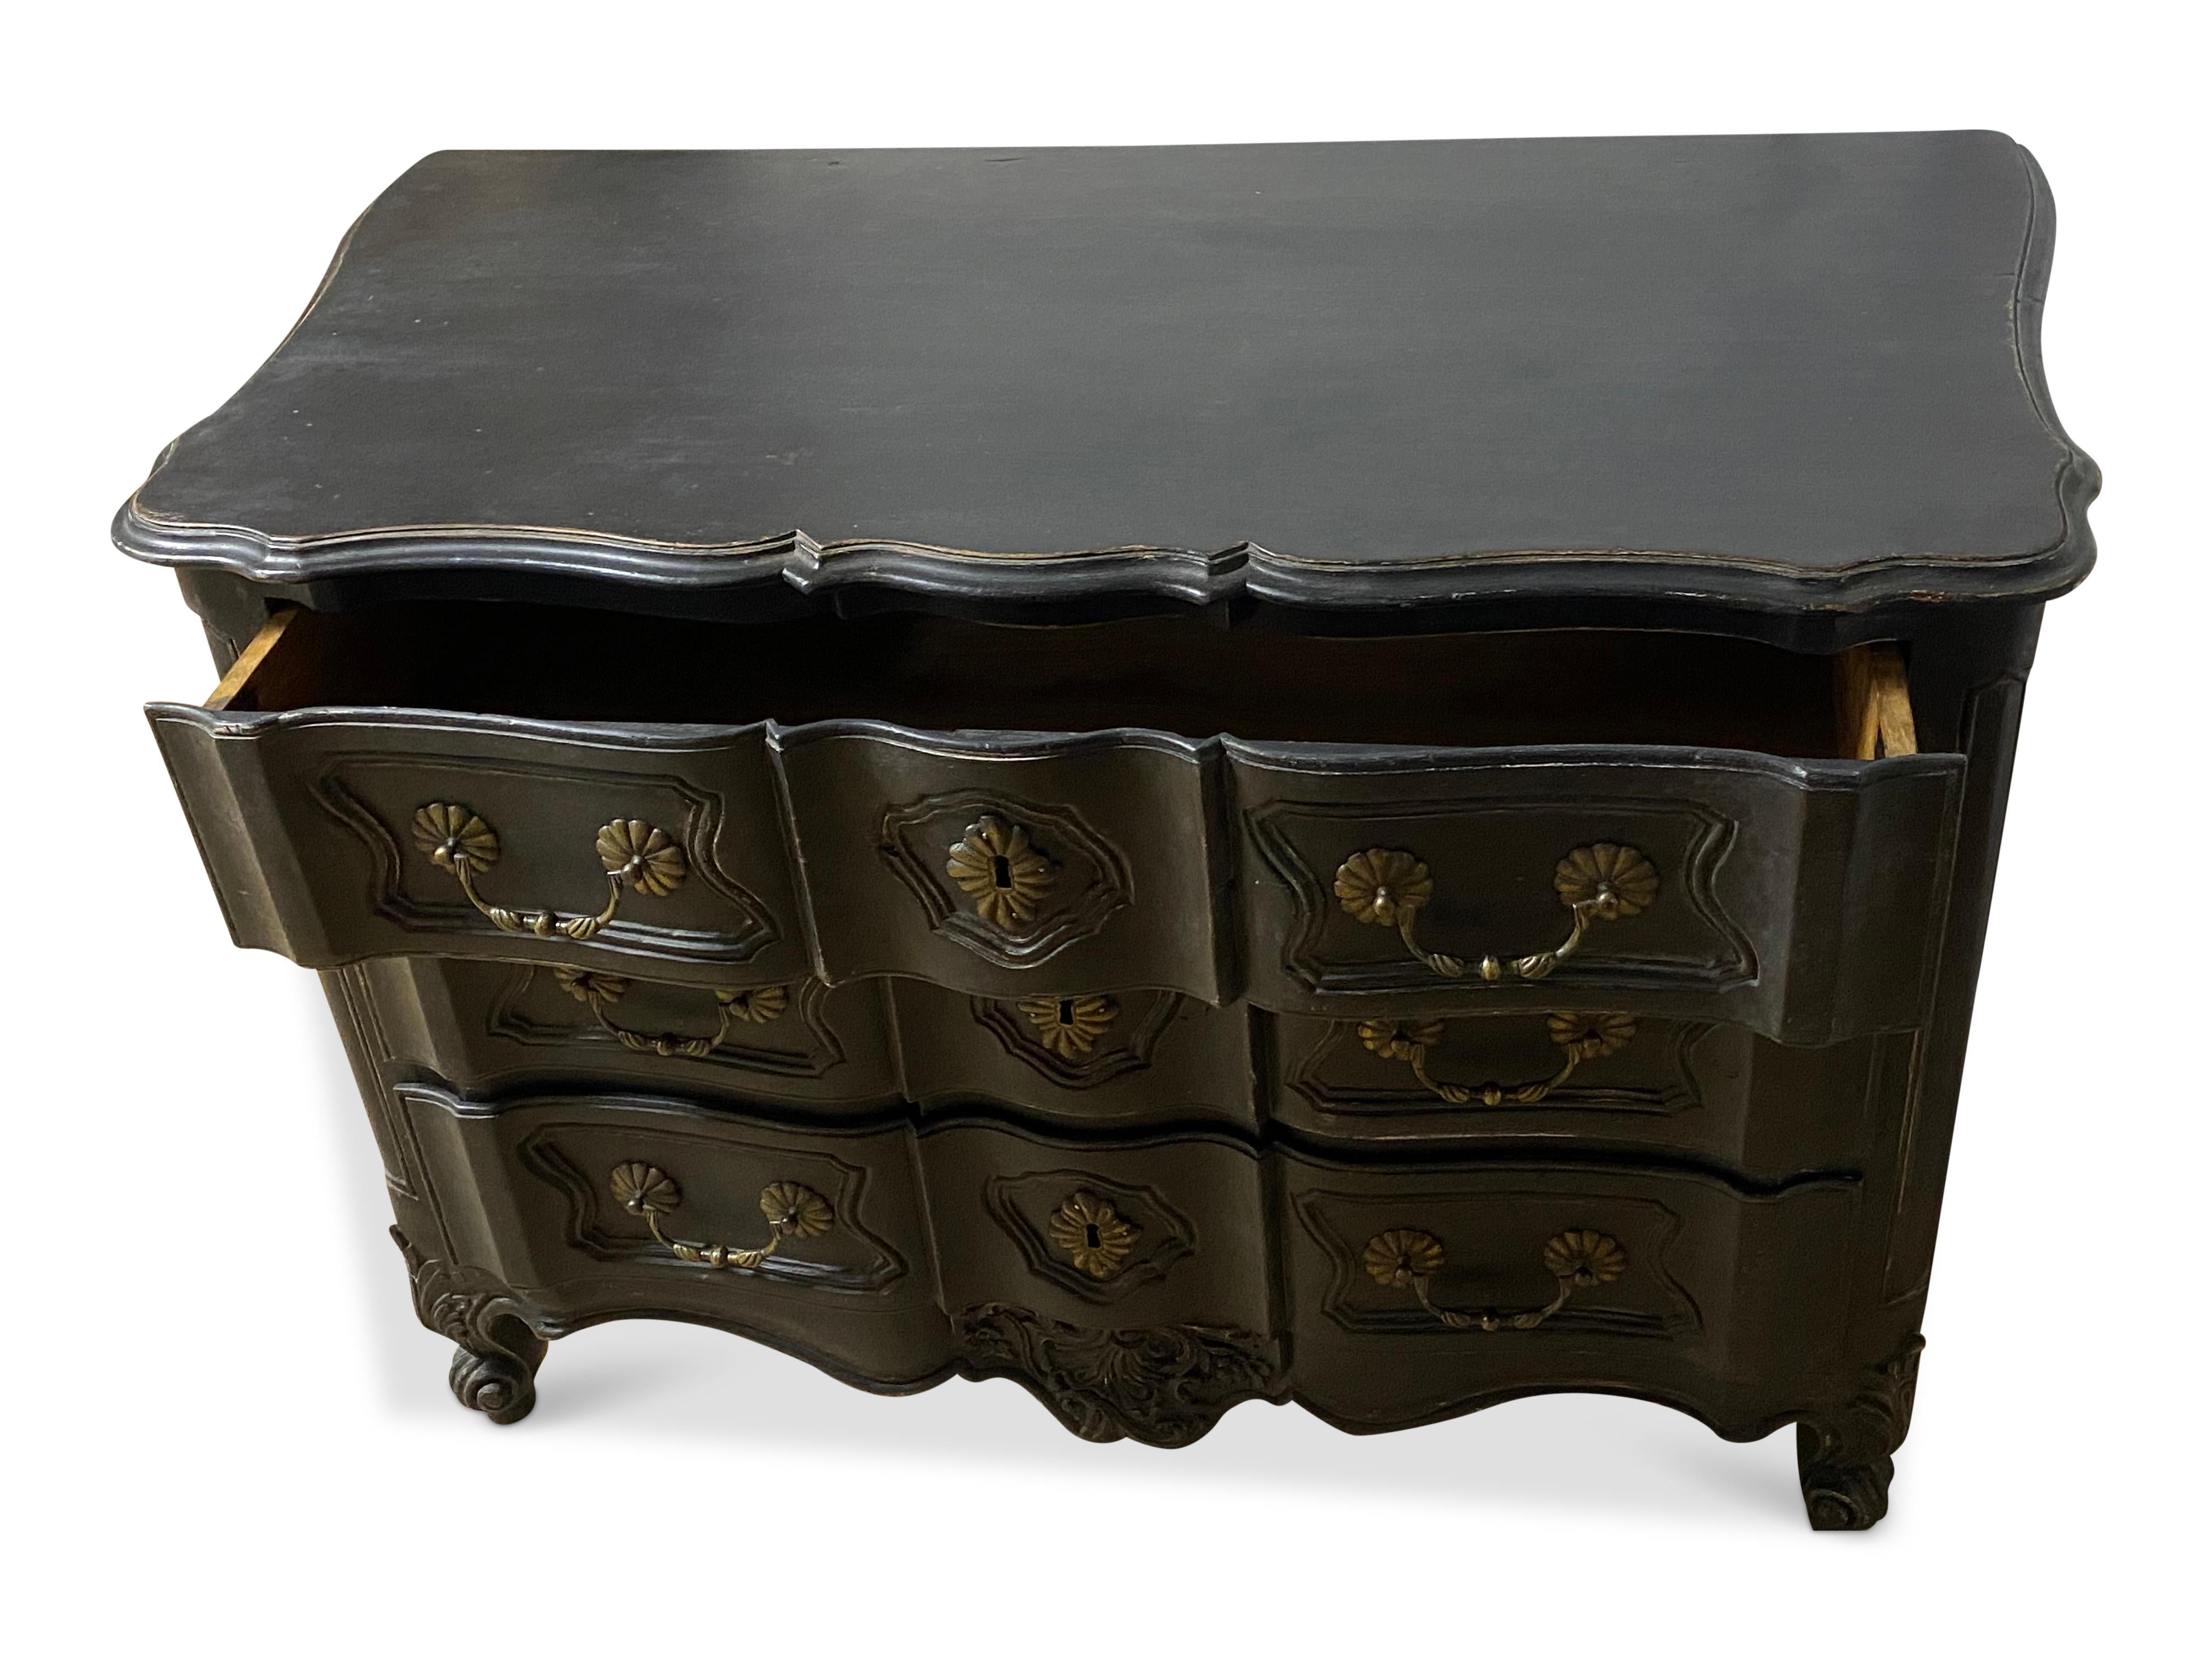 Wonderful 18th Century French serpentine commode with original handles.The later ebonised paintwork has given this piece a super contemporary look and an amazing storage solution.With scrolled feet and carvings and original brass ironwork  that